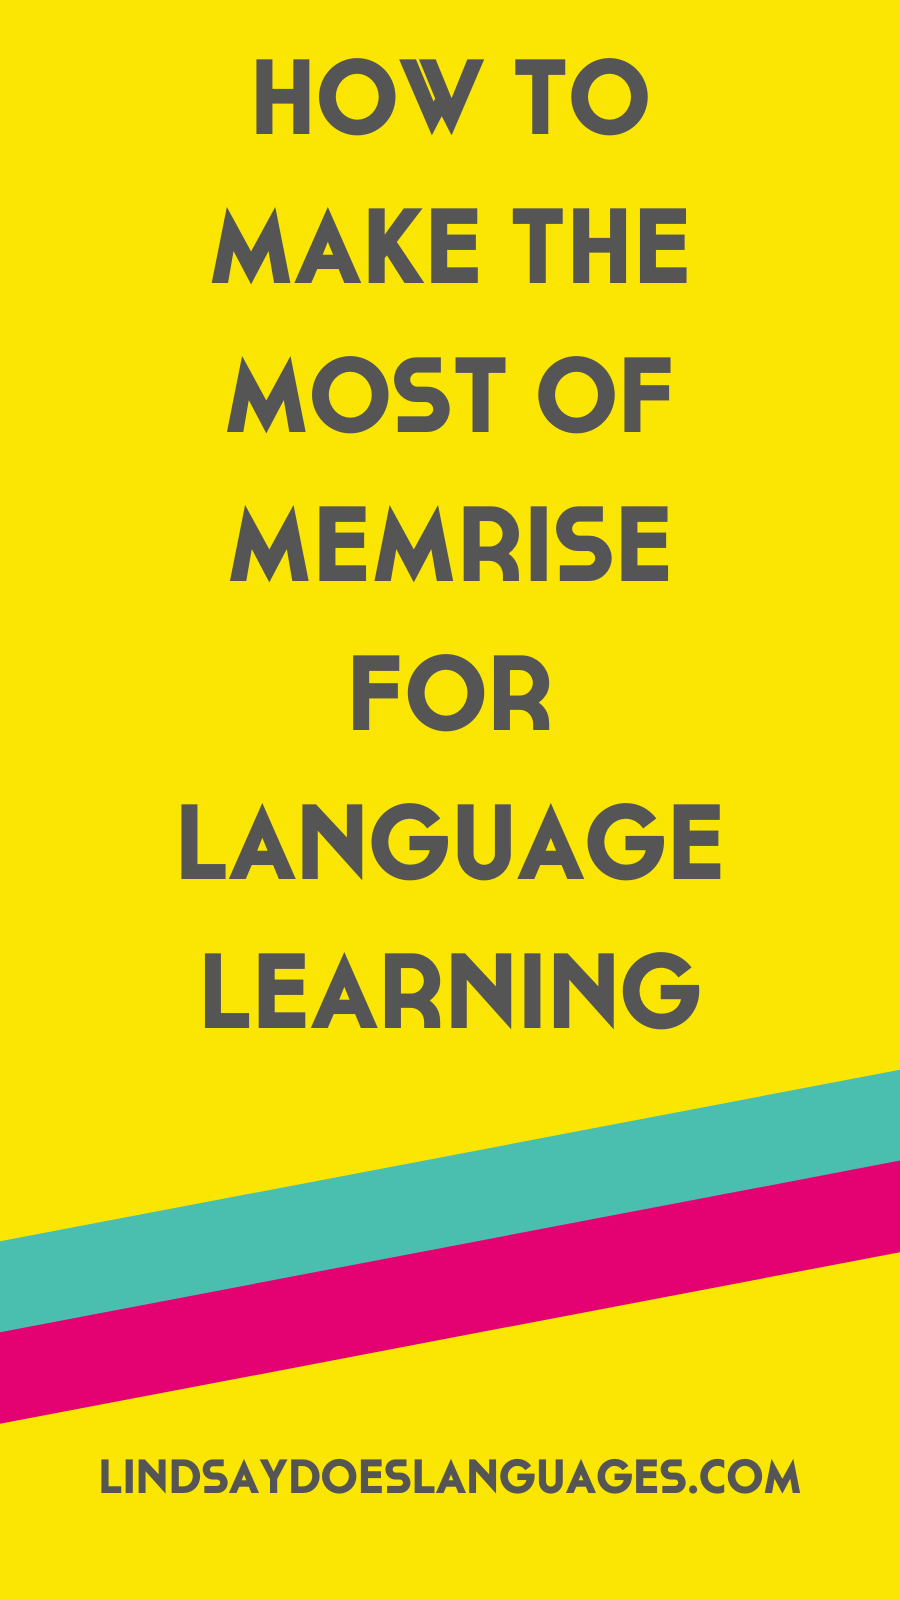 Memrise is one of my favourite language apps, and one of my favourite vocab tools. Want to know how to make the most of Memrise? Let's go!